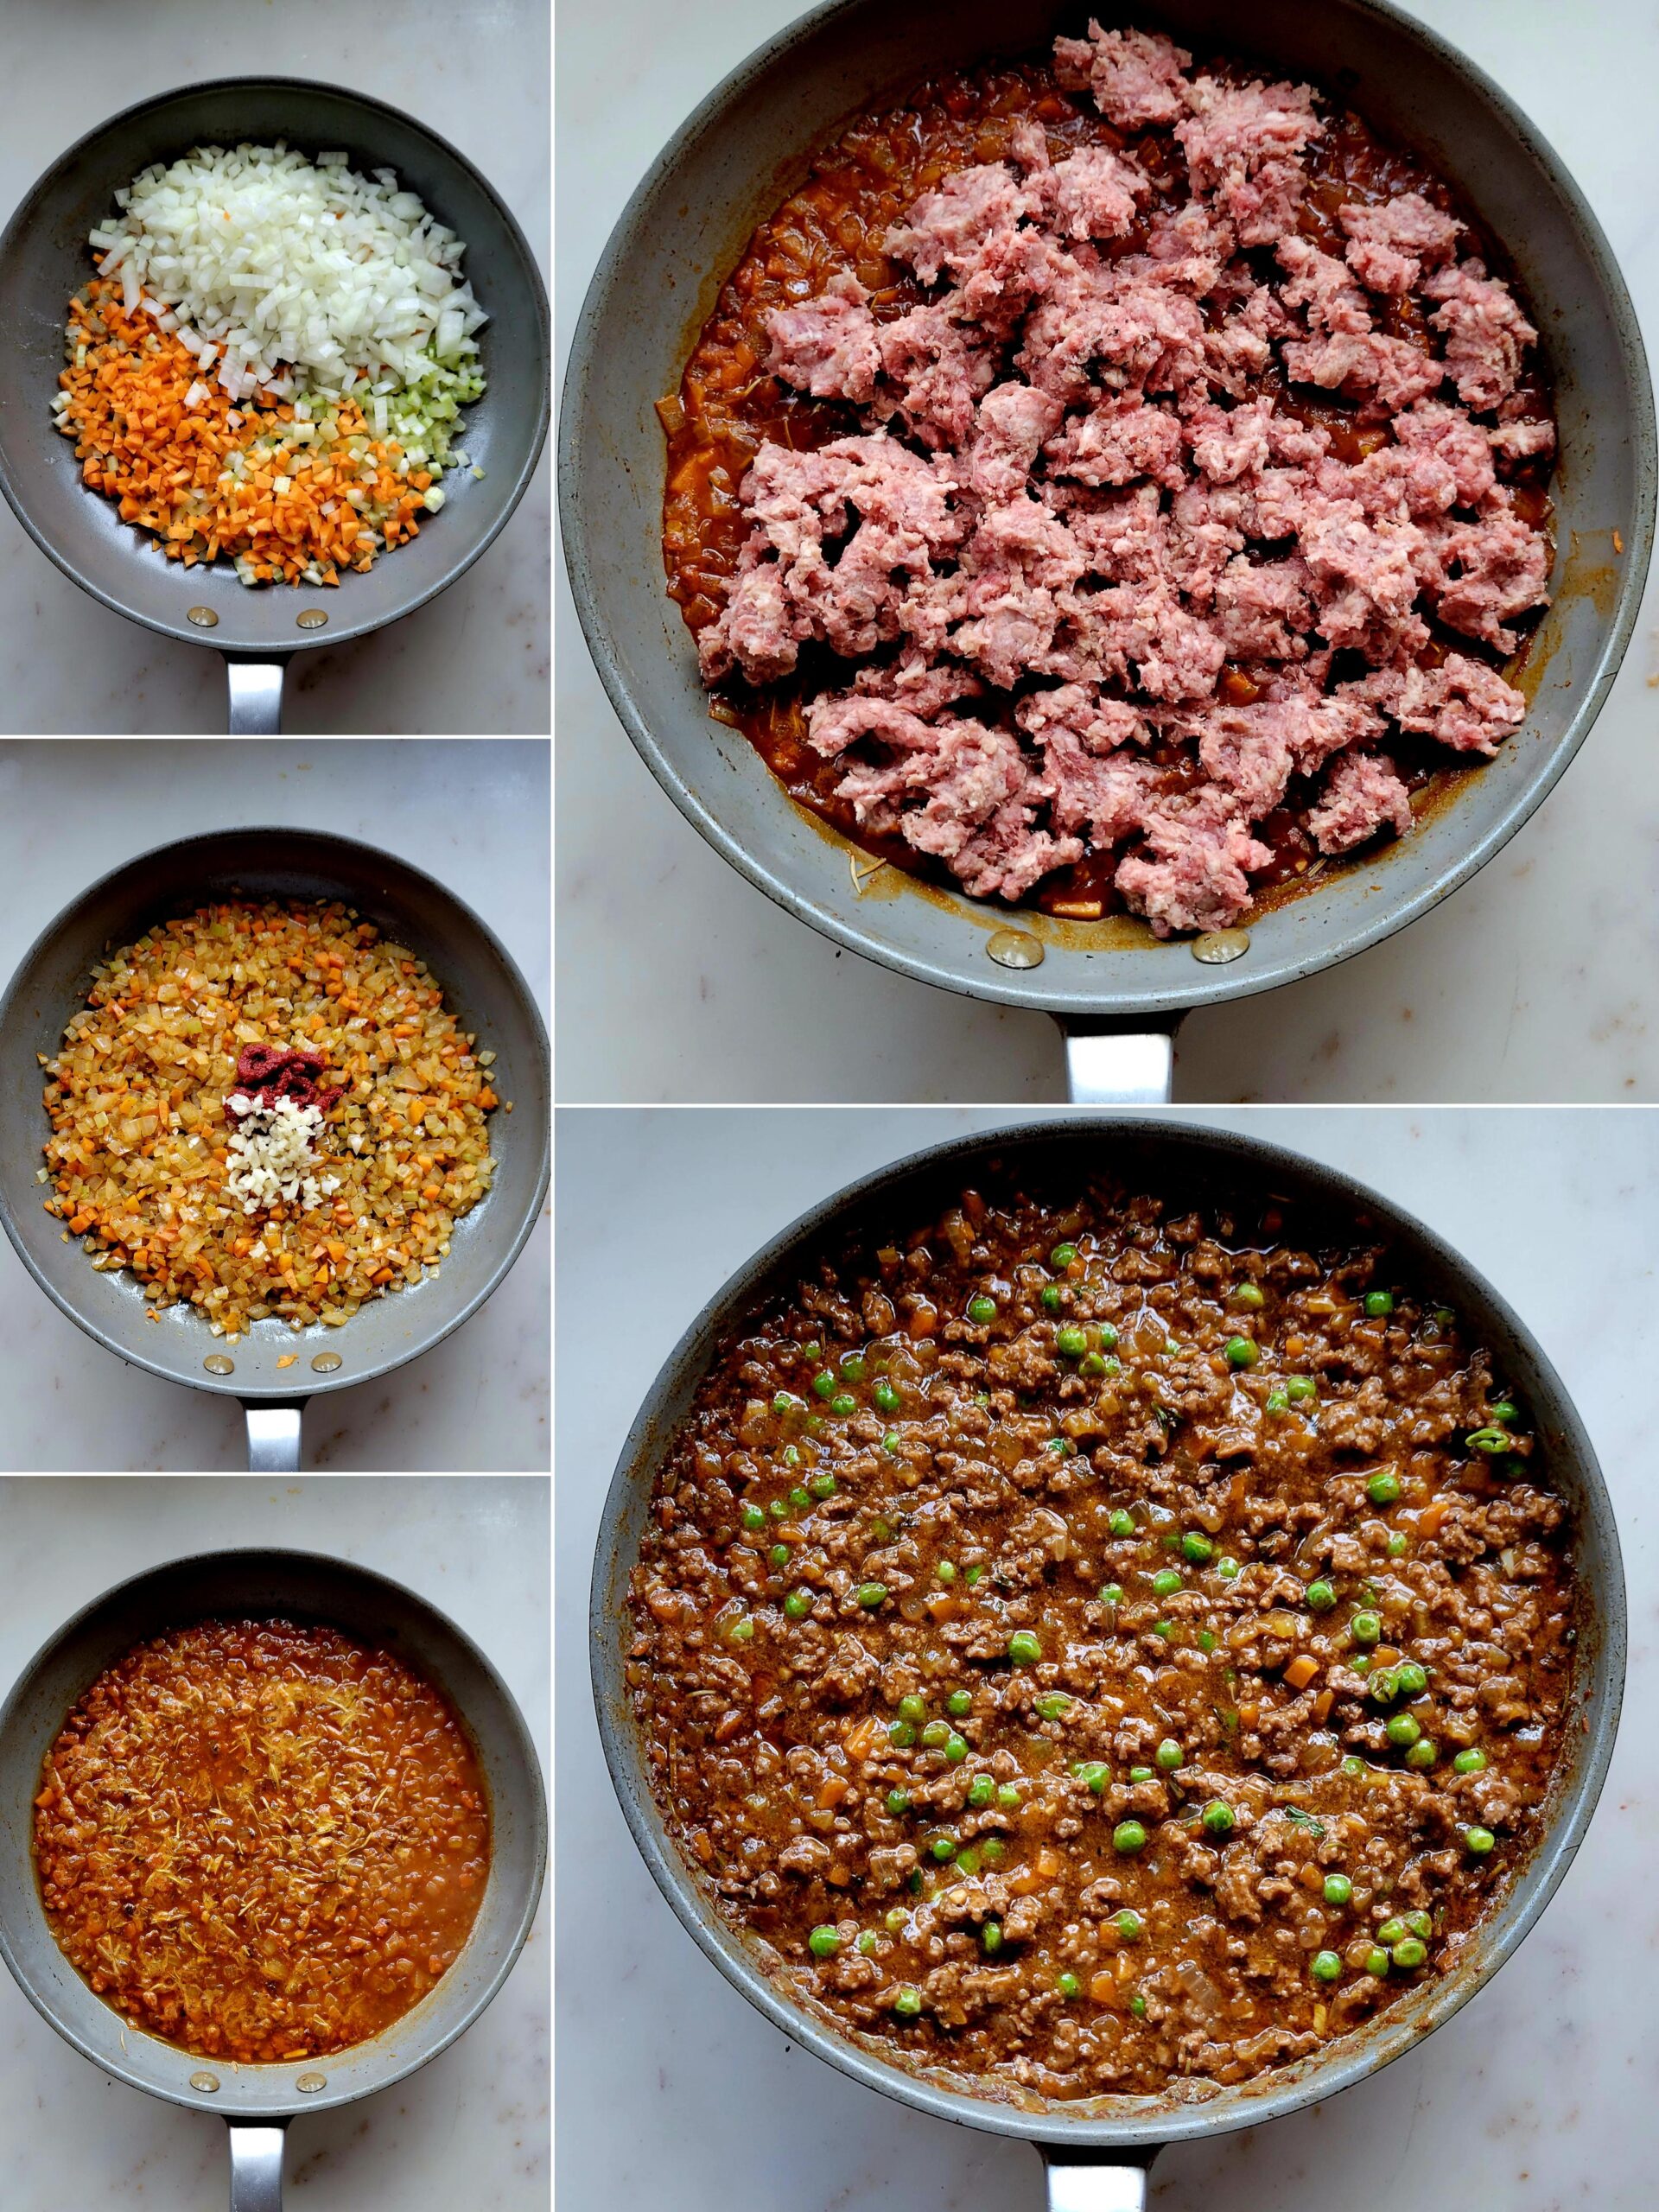 Collage showing the making of the Sheperd's Pie filling for Stuffed Potatoes